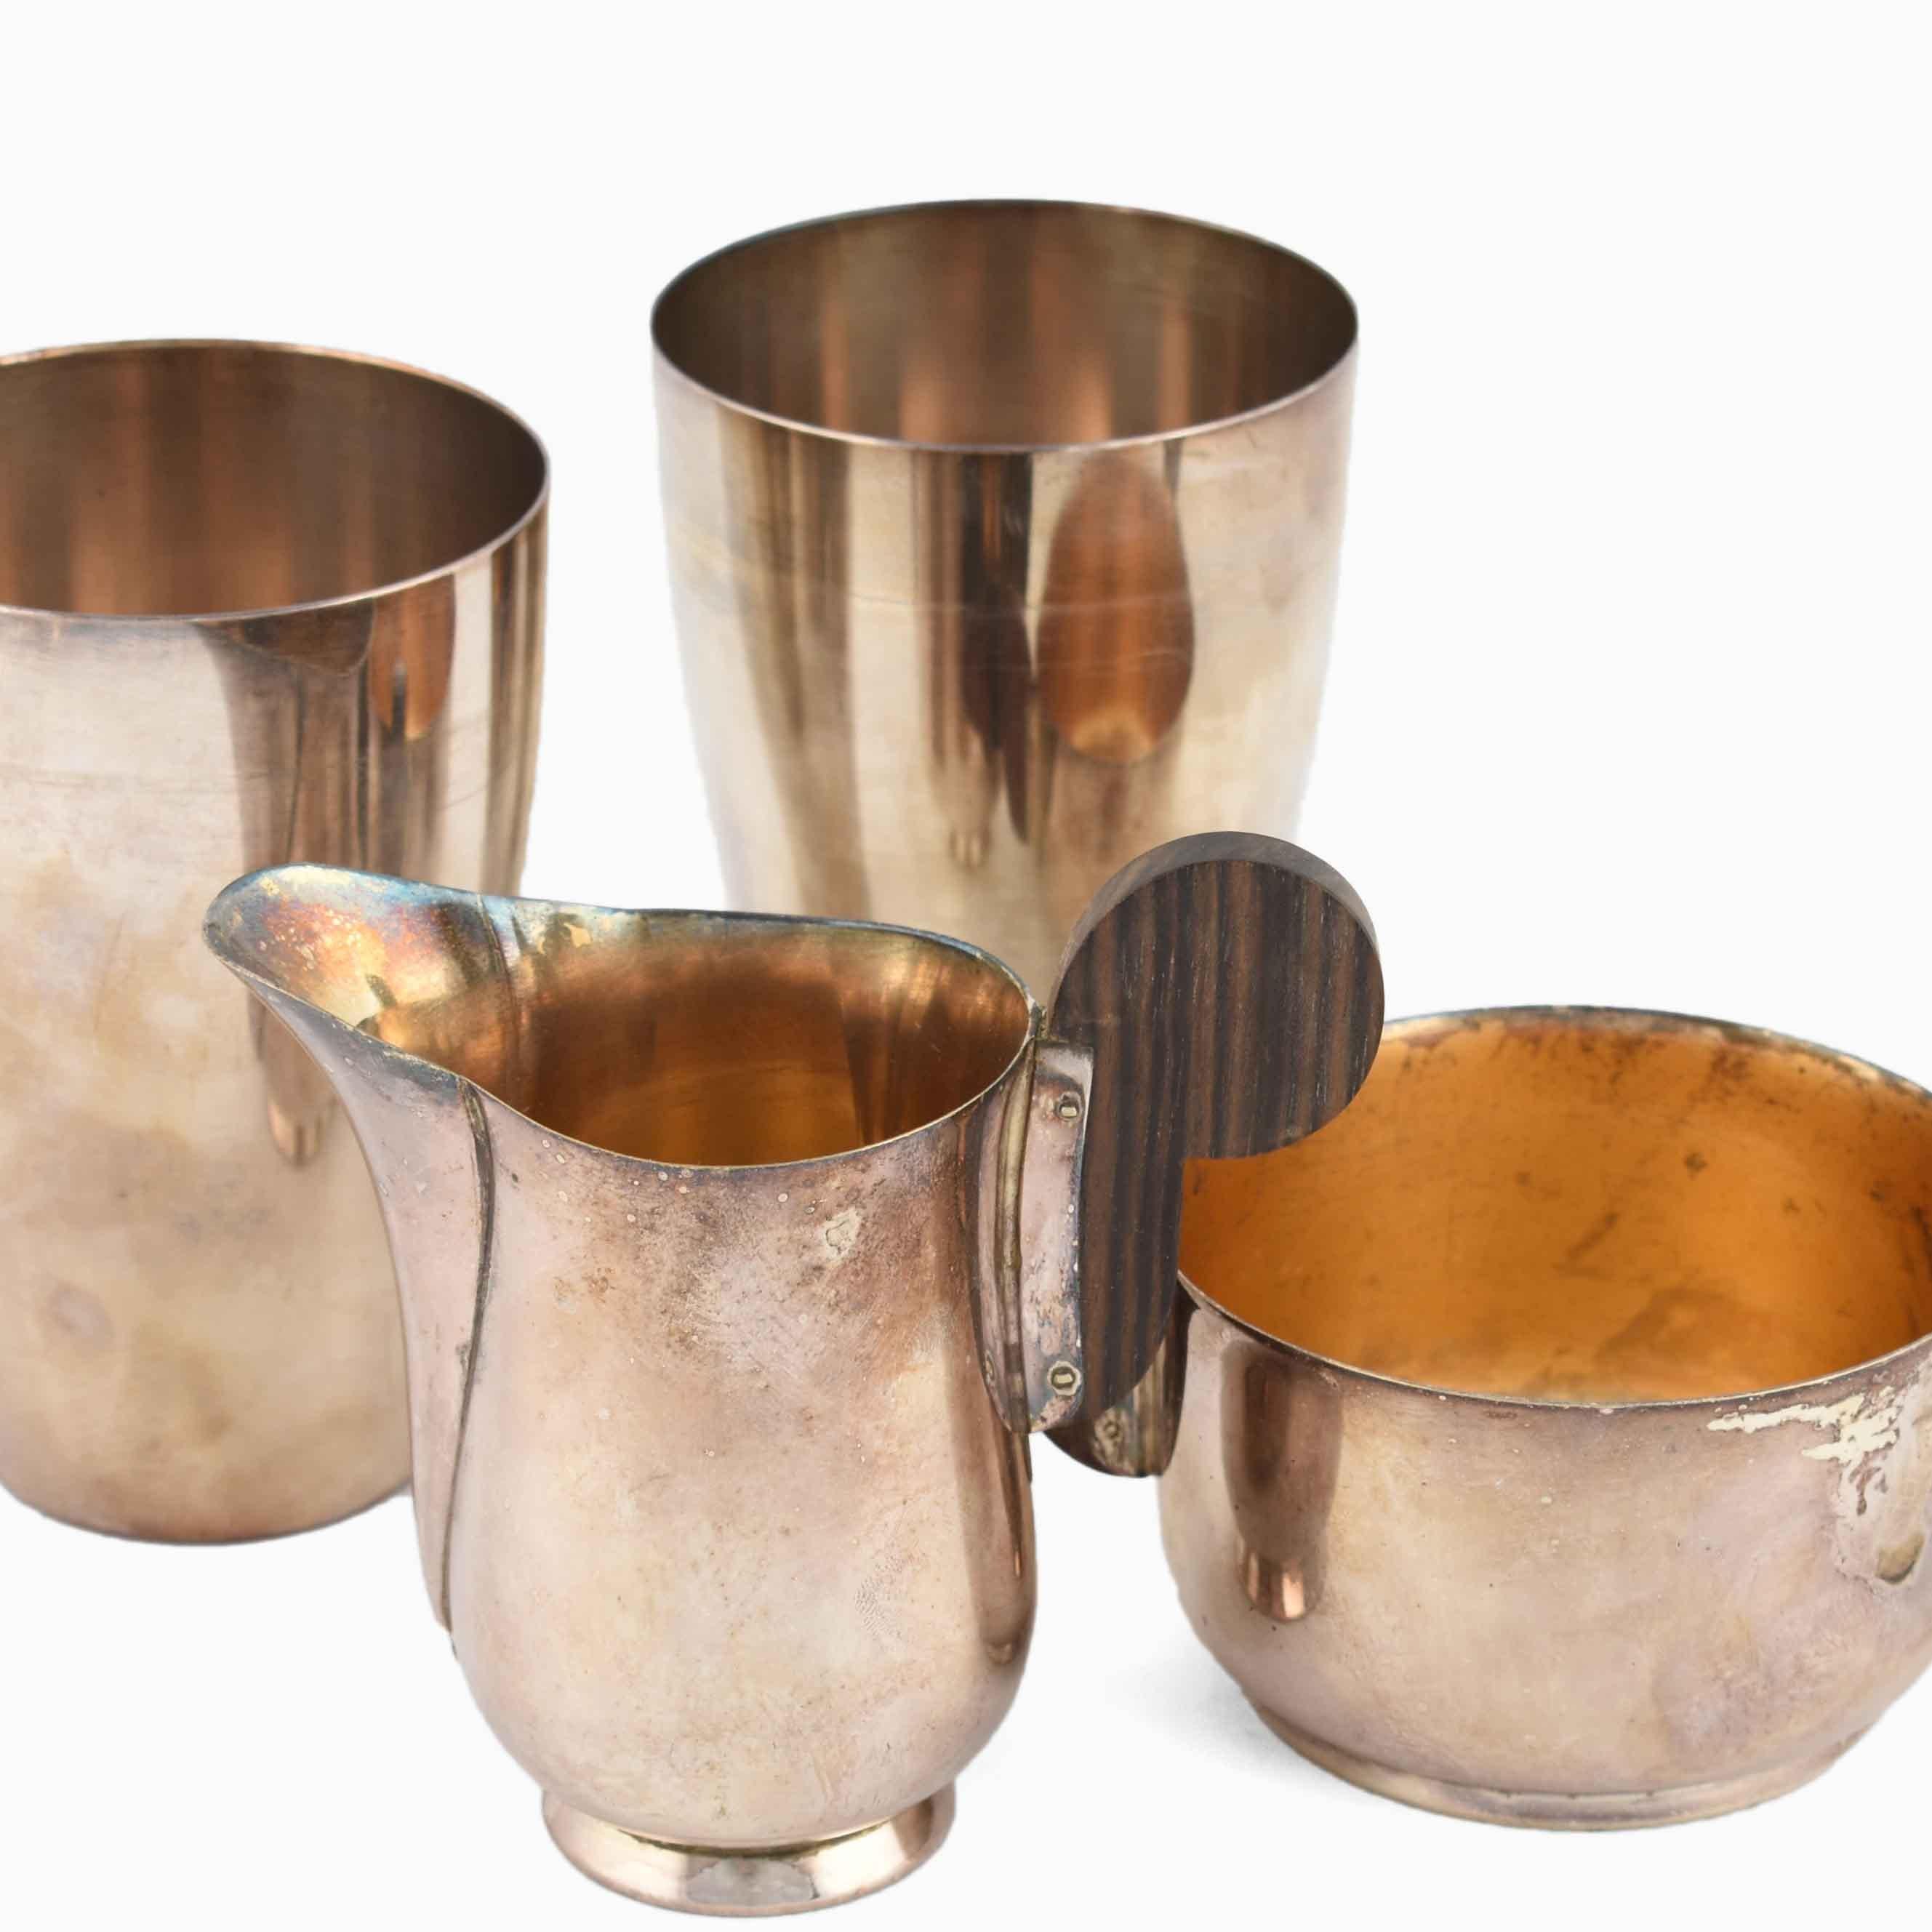 Art Deco silverware is an original decorative group of works realized in the second third of the 20th century.

The group includes: One sugar bowl, one cream bowl and two mugs. 

All the pieces are realized in silver plate.

Realized by WMF in